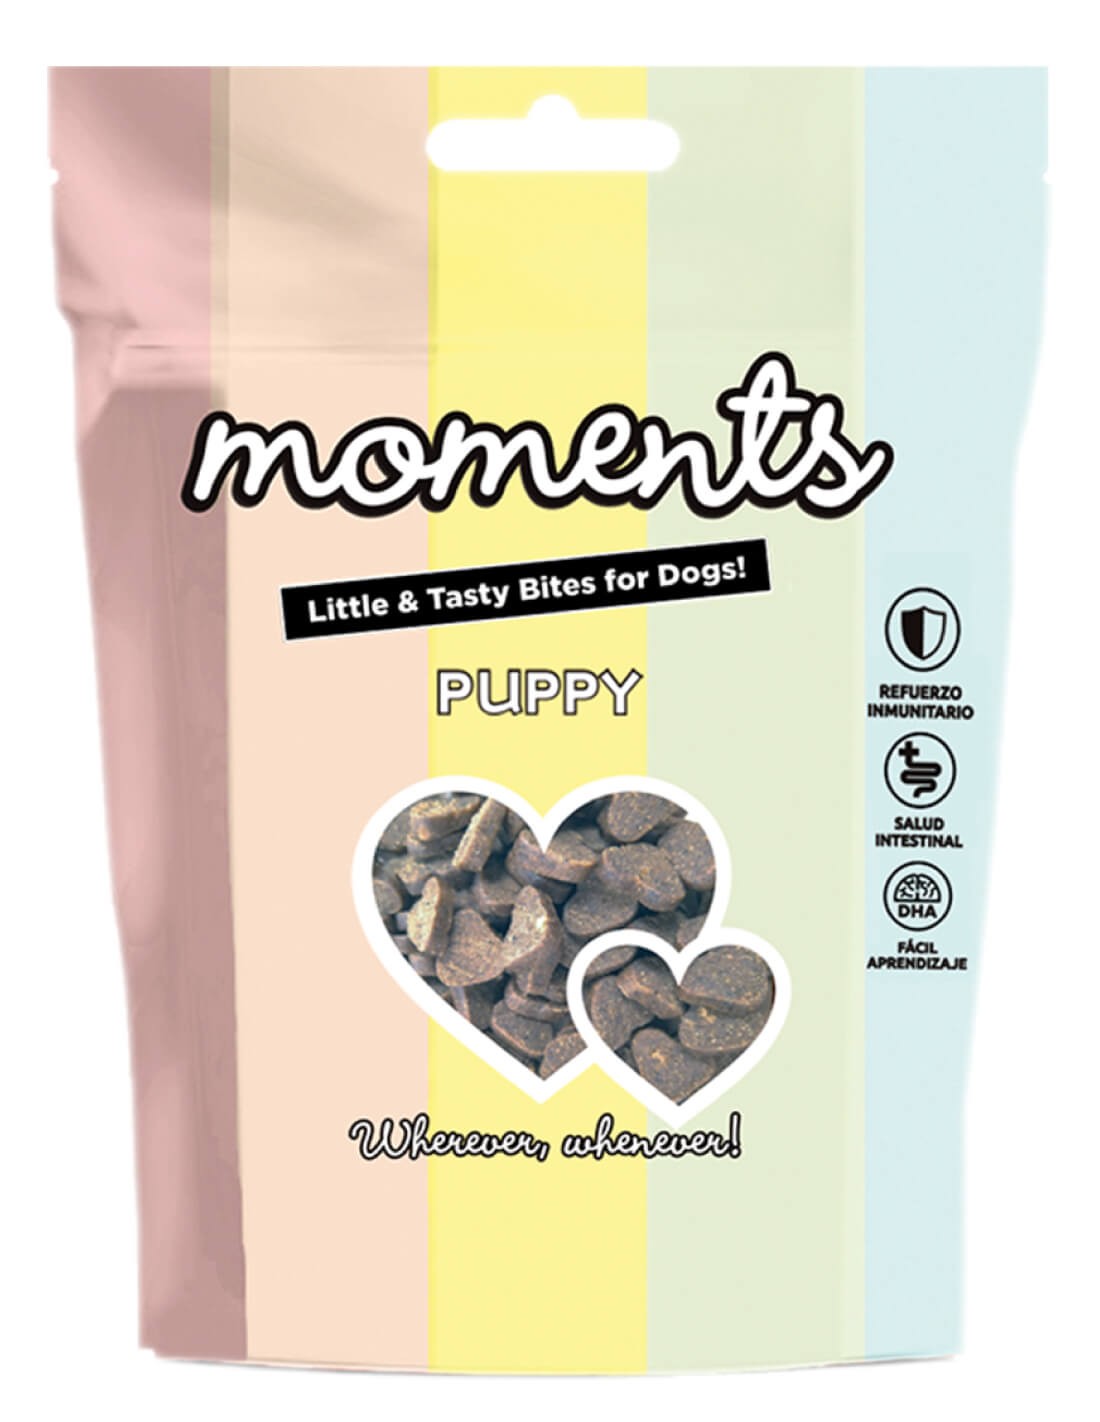 MOMENTS Puppy 60g - Snack para perro